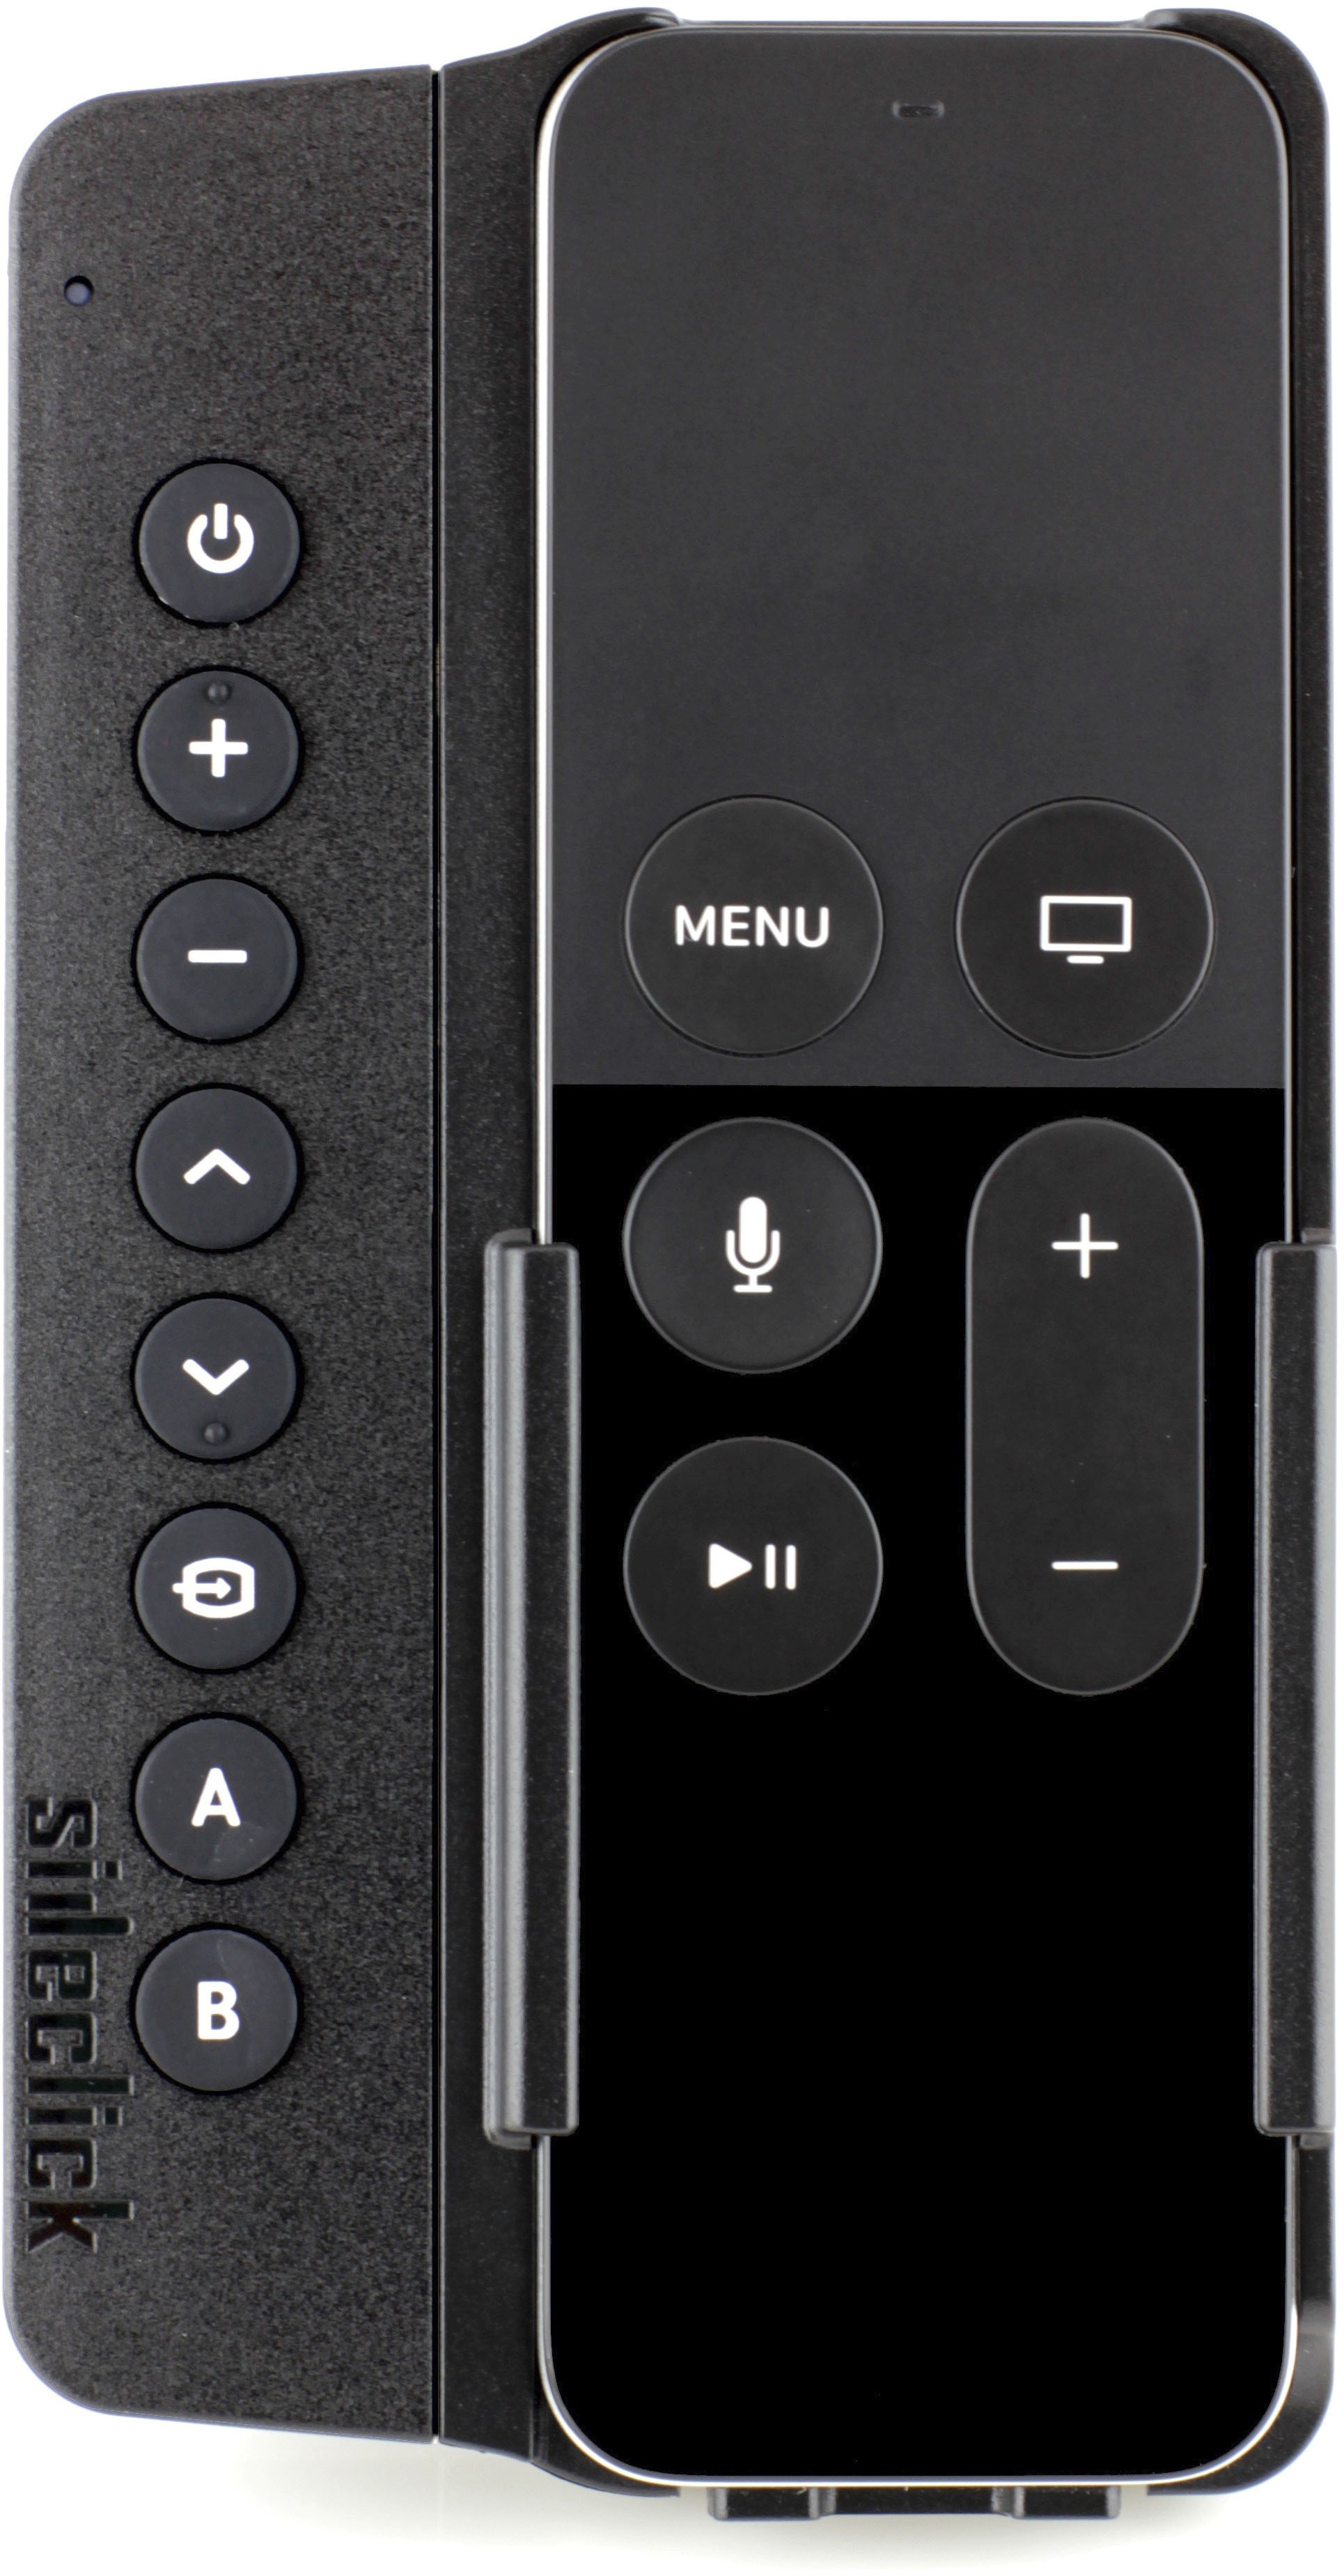 Sideclick Universal Remote Attachment for Apple TV 2nd, 3rd, 4th, and 5th 4K Generation Black SC2-APG34K - Best